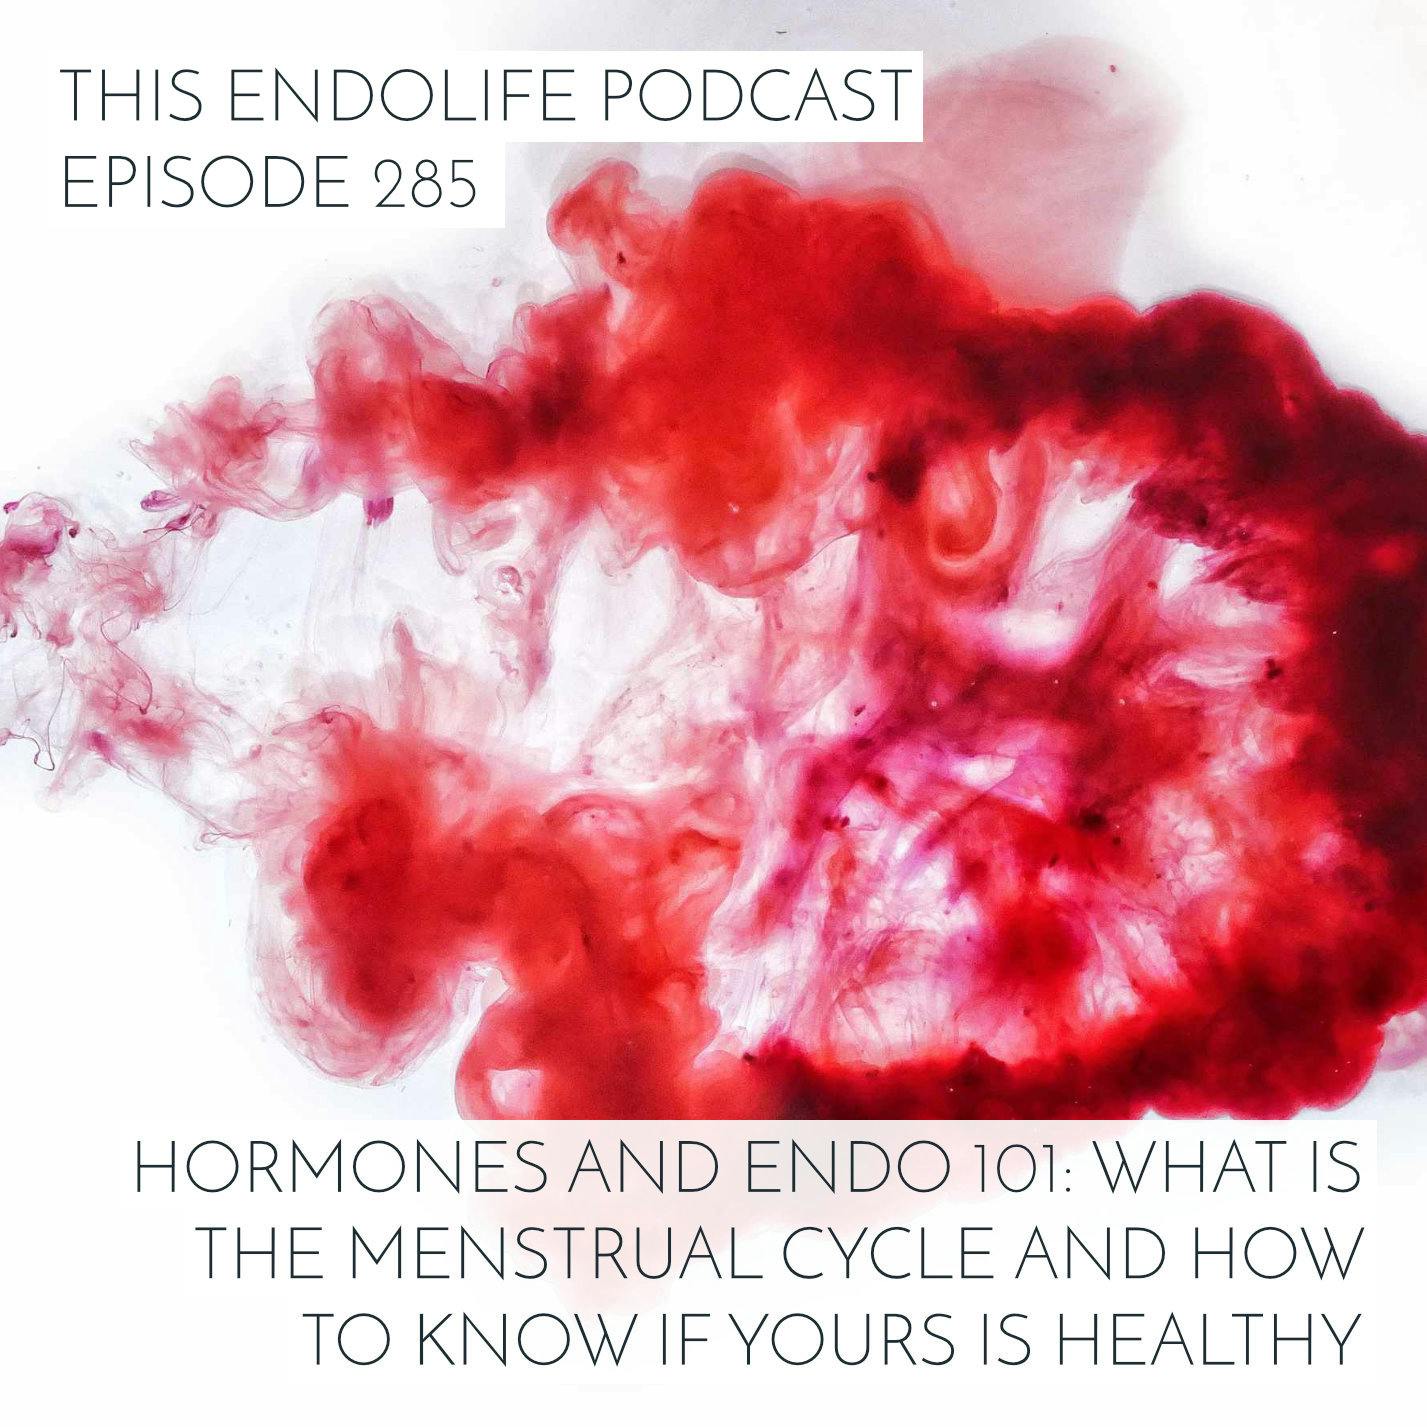 REPLAY: What is The Menstrual Cycle and How to Know If Yours is Healthy